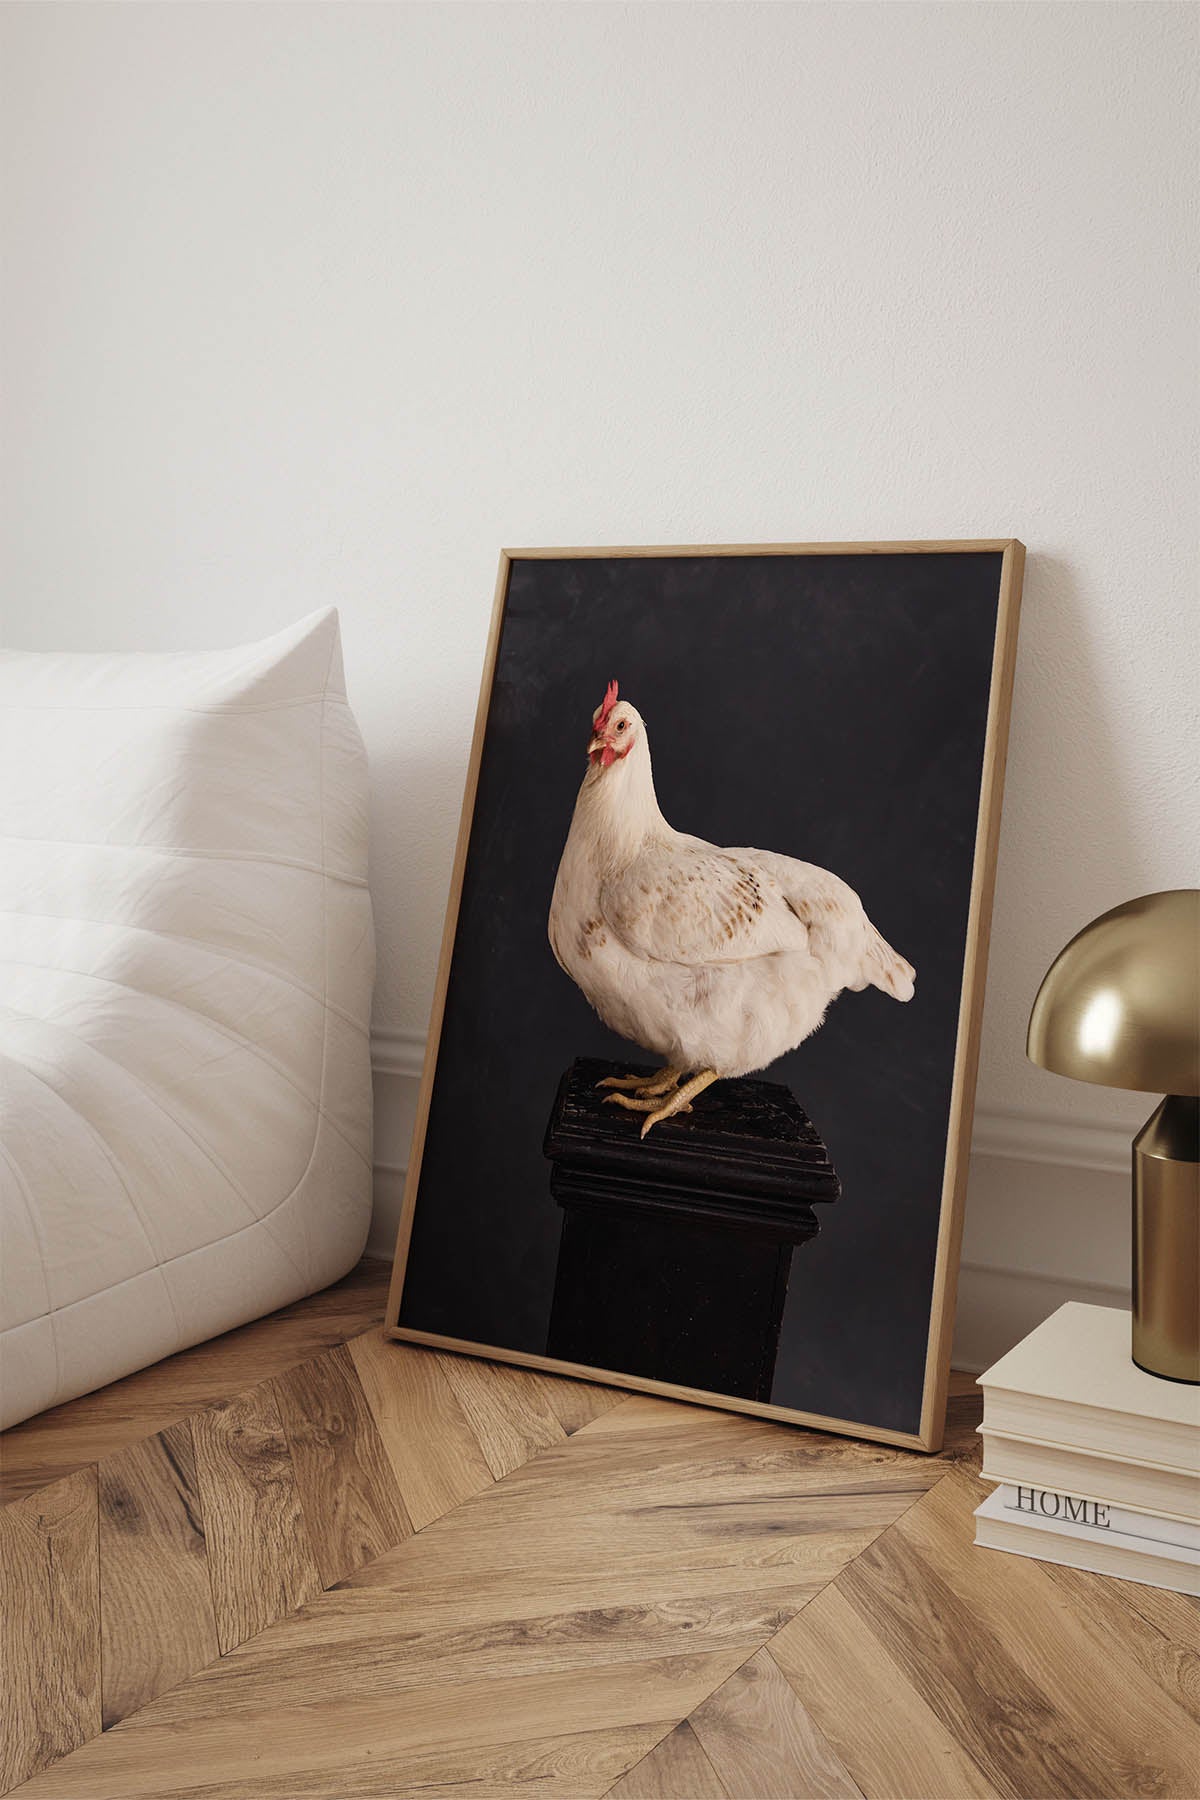 Fine Art Print Of A White Chicken Standing On A Black Plinth With A Black Background Framed Leaning Against A Wall Sitting On Oak Herringbone Floors.